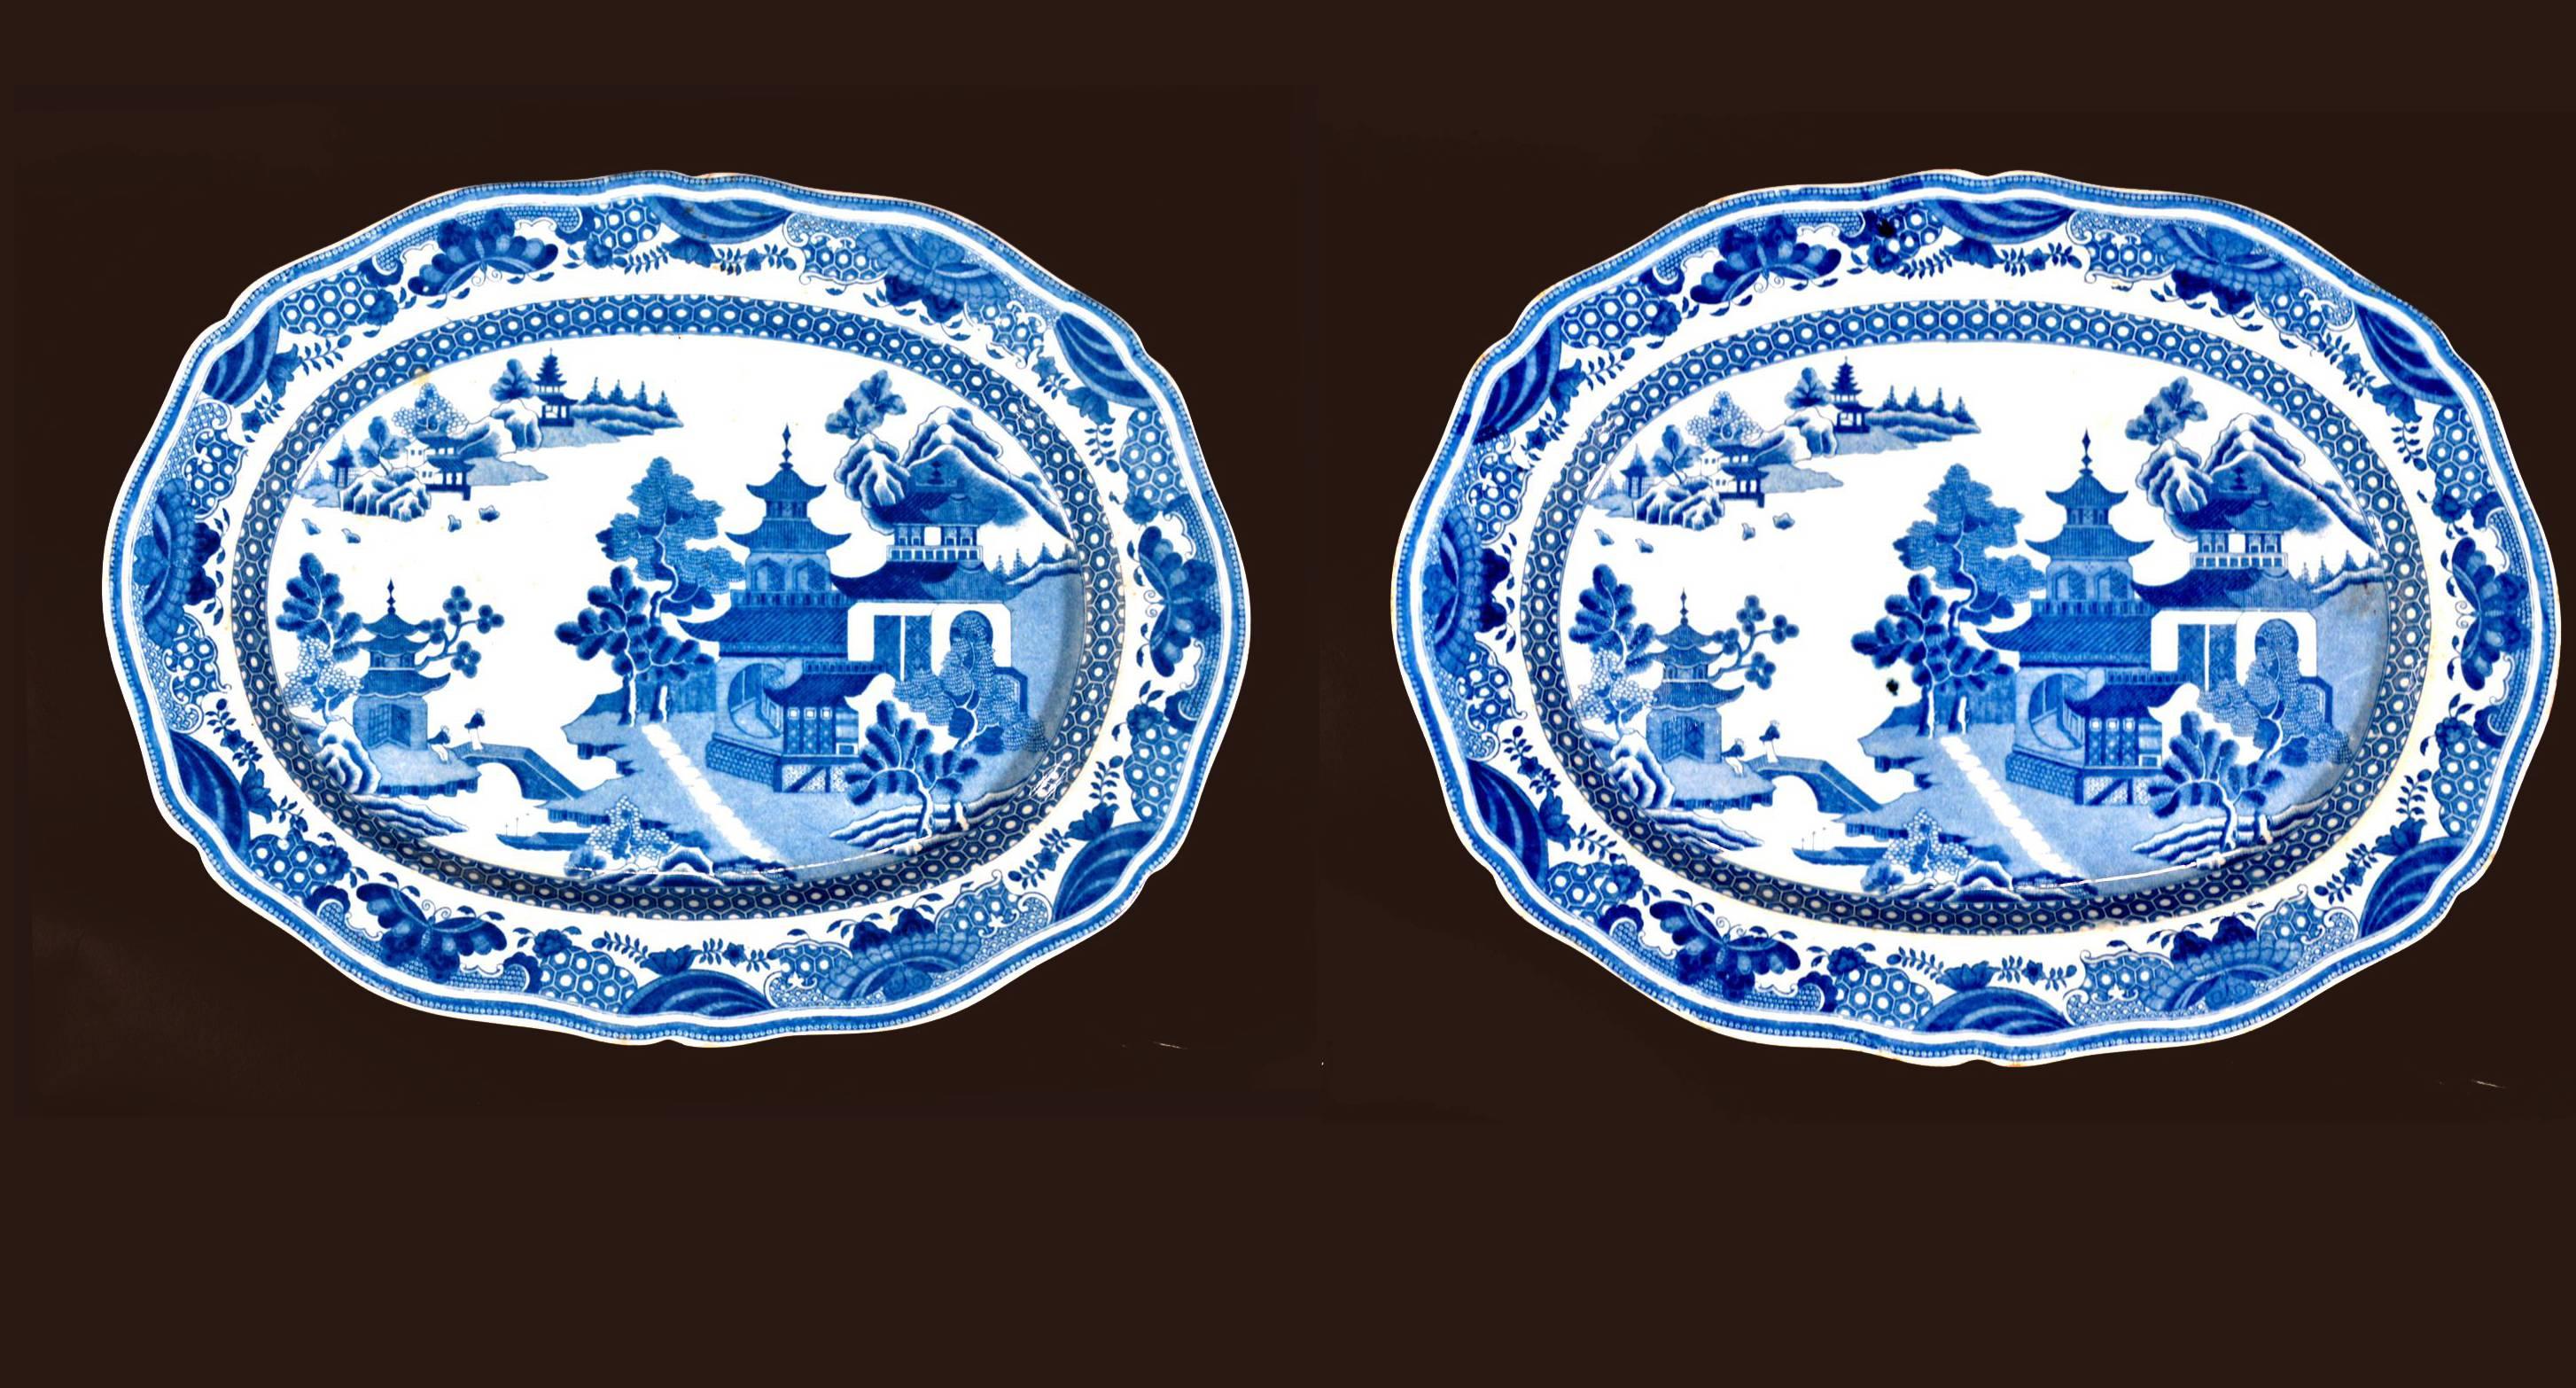 The Pearlware under-glaze blue & white oval dishes are decorated in the central well with a typical Chinoiserie riverscape scene with a pagoda in the forefront and Chinese figures crossing a bridge.
